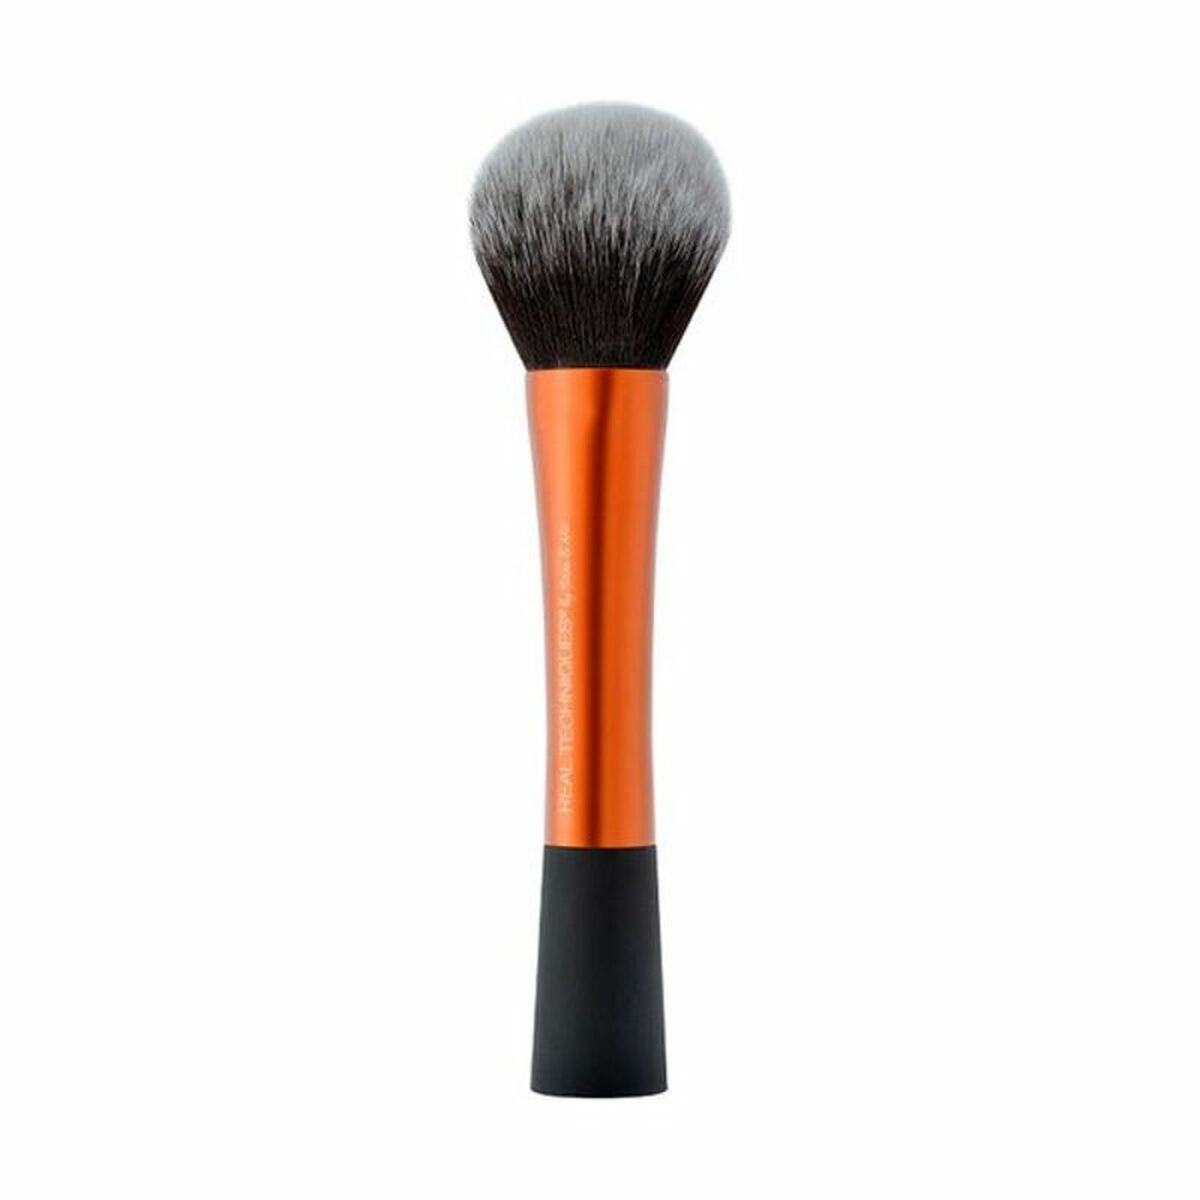 Make-up Brush Powder Real Techniques 079625014013-1a-0